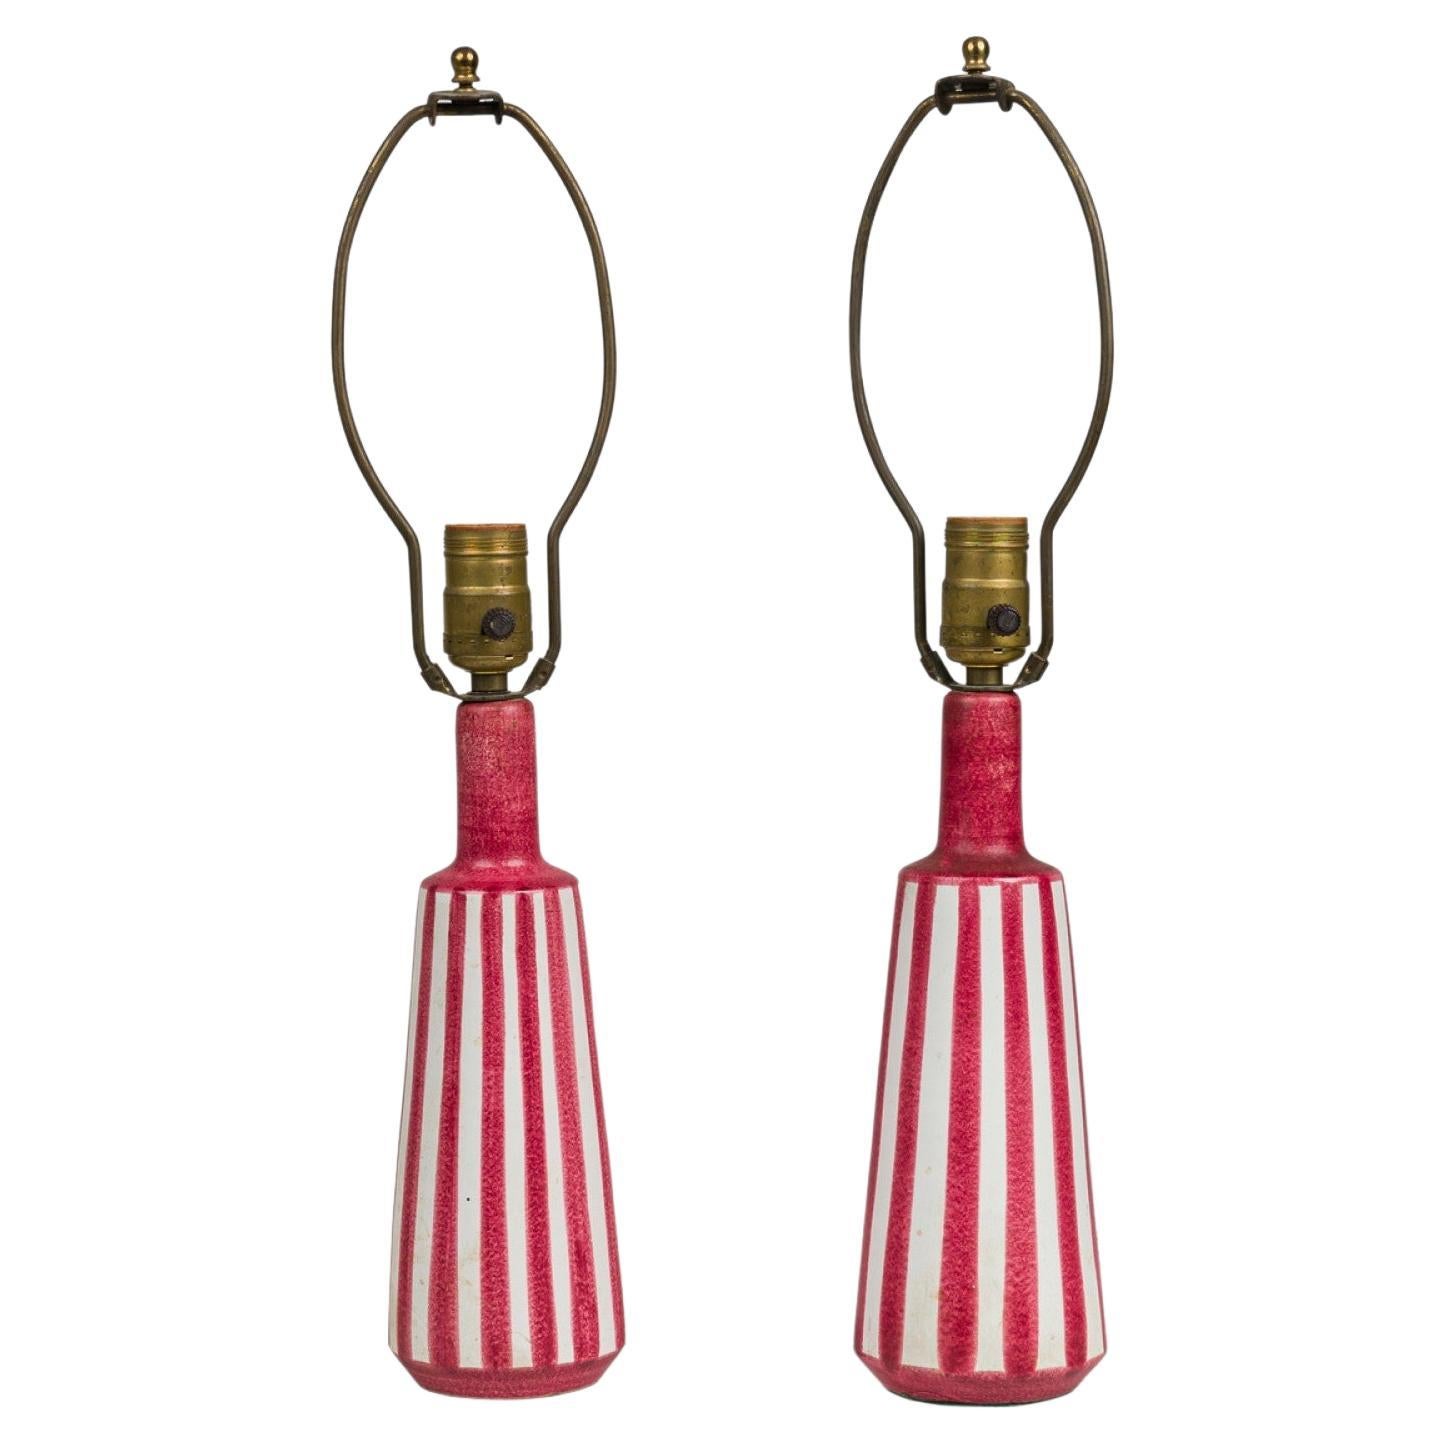 Pair of Italian Ceramic Hand Painted Red and White Candy Stripe Table Lamps